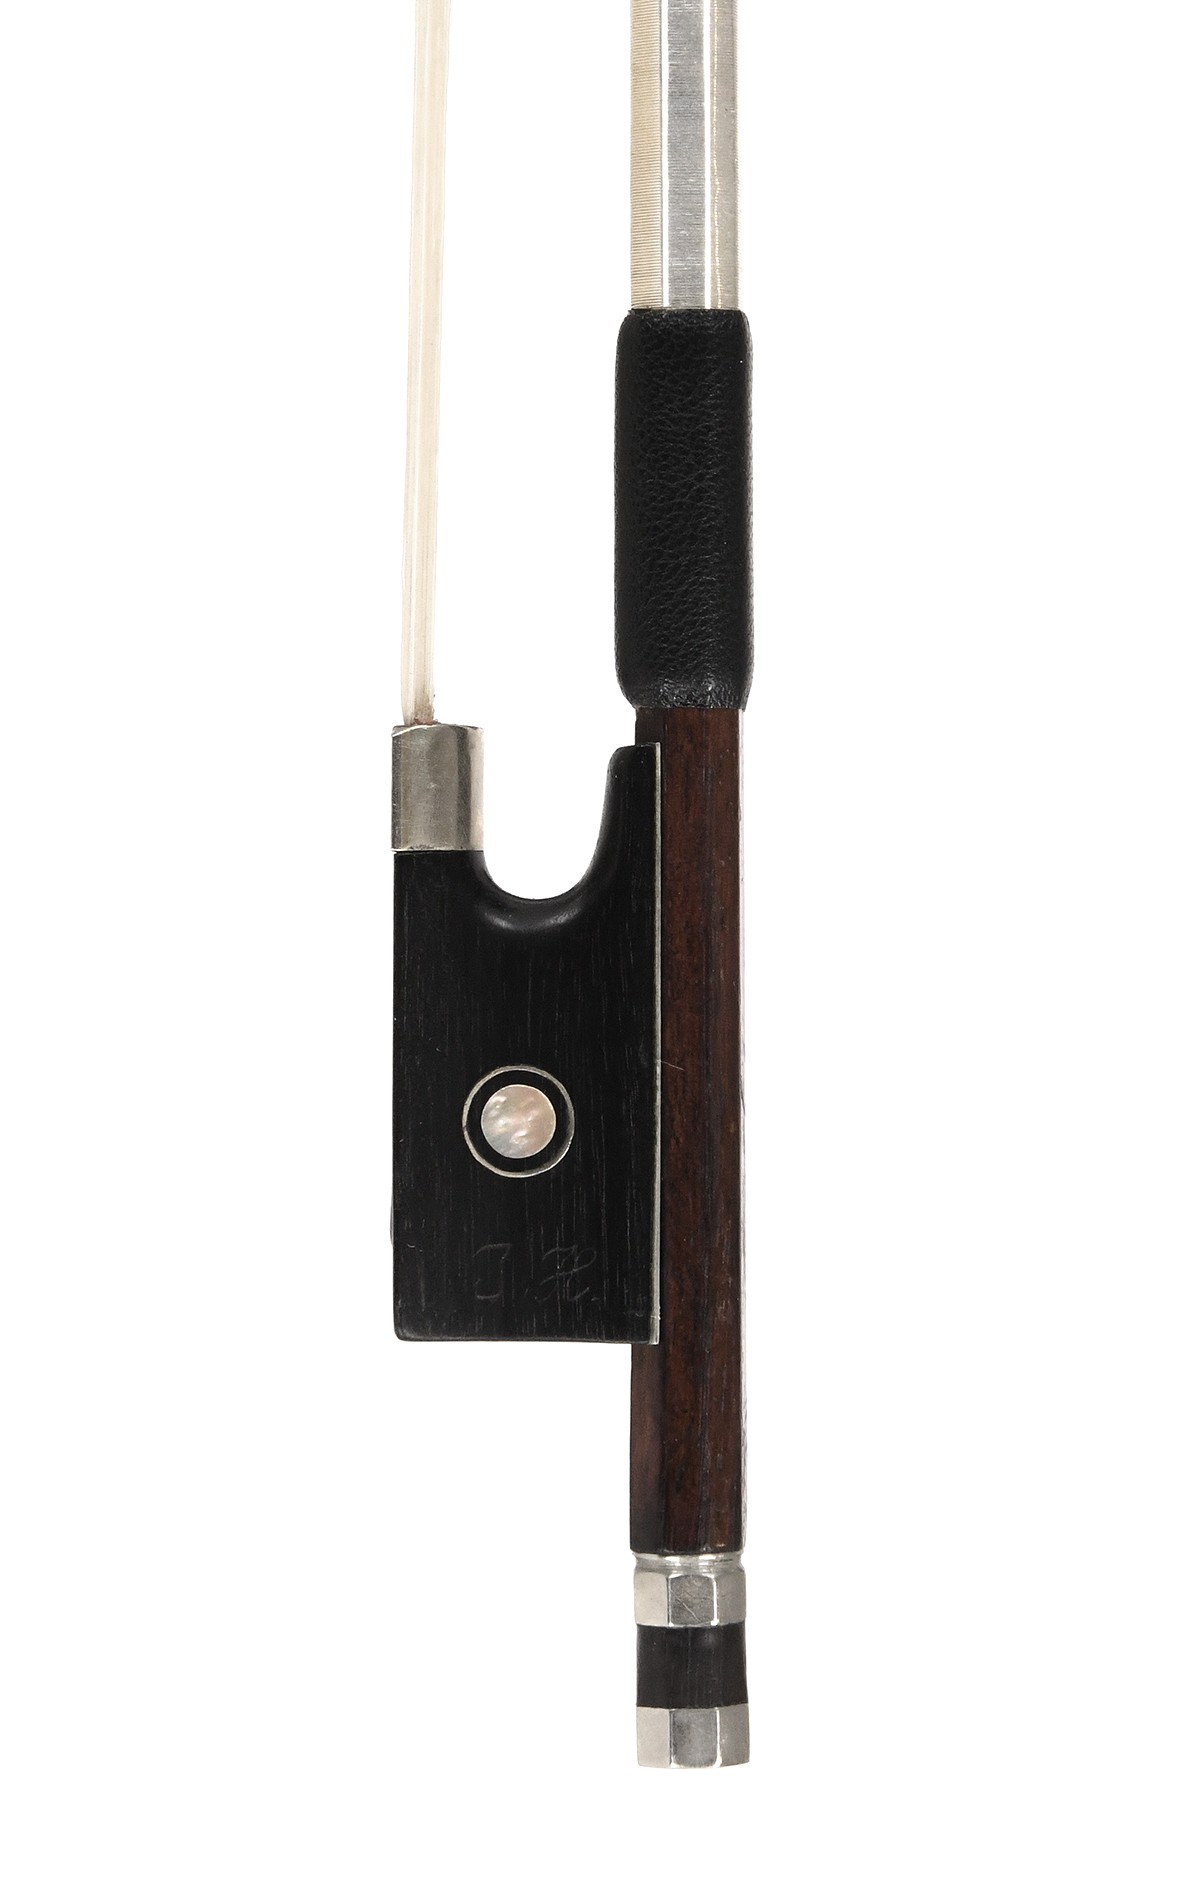 Antique violin bow with outstanding playing qualities, circa 1900